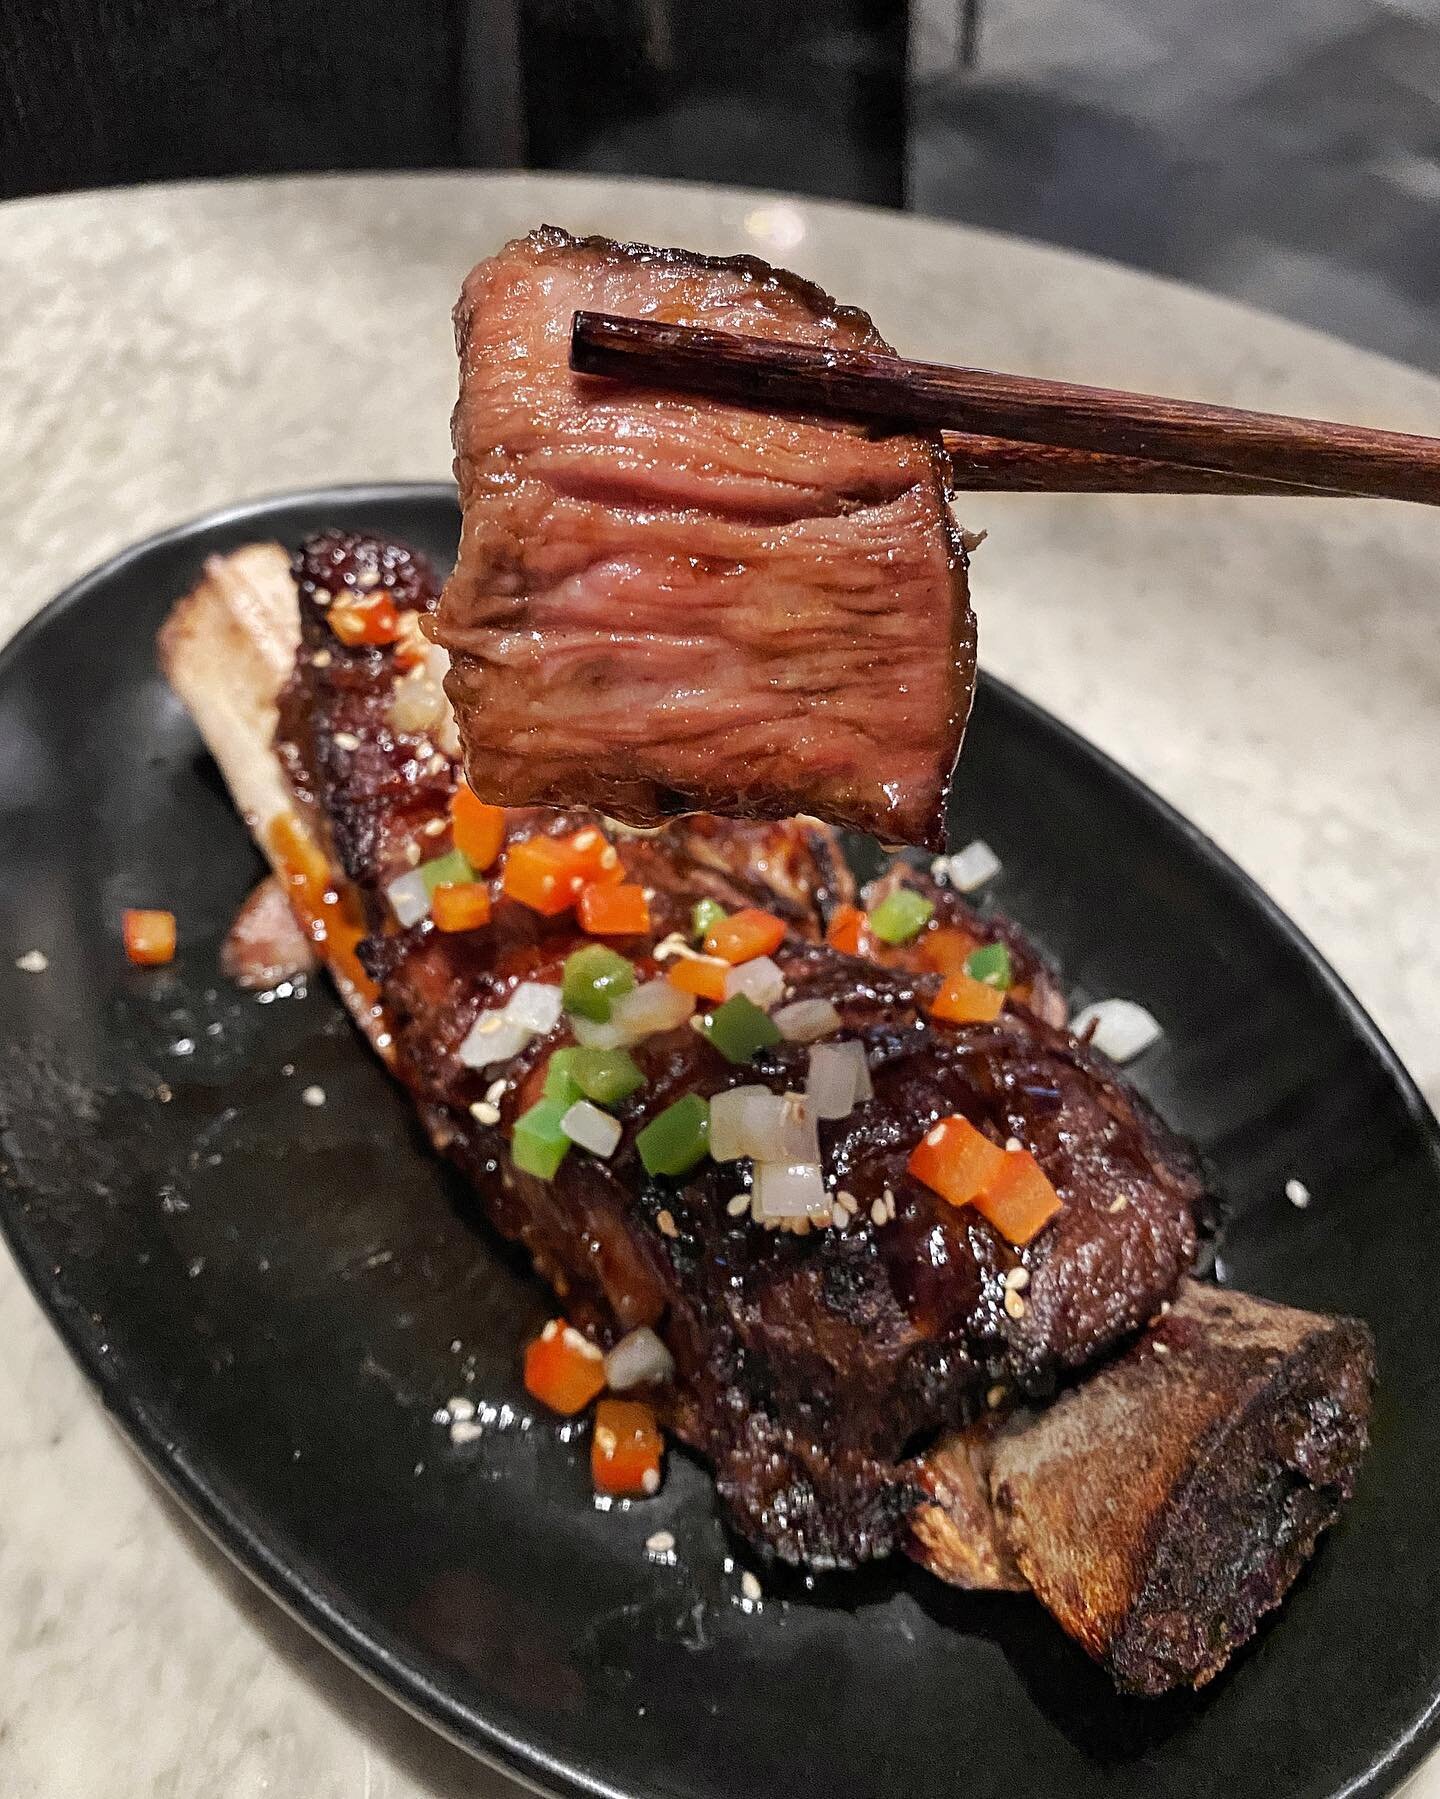 CRISPY TRIPLE COOKED US BLACK ANGUS SHORT RIB 🤤&hearts;️ i&rsquo;ll tell you all about it when i see you again 😩 @mott32van

if i had known that this was gonna be our last visit, i probably would&rsquo;ve said &ldquo;see you later&rdquo; properly &